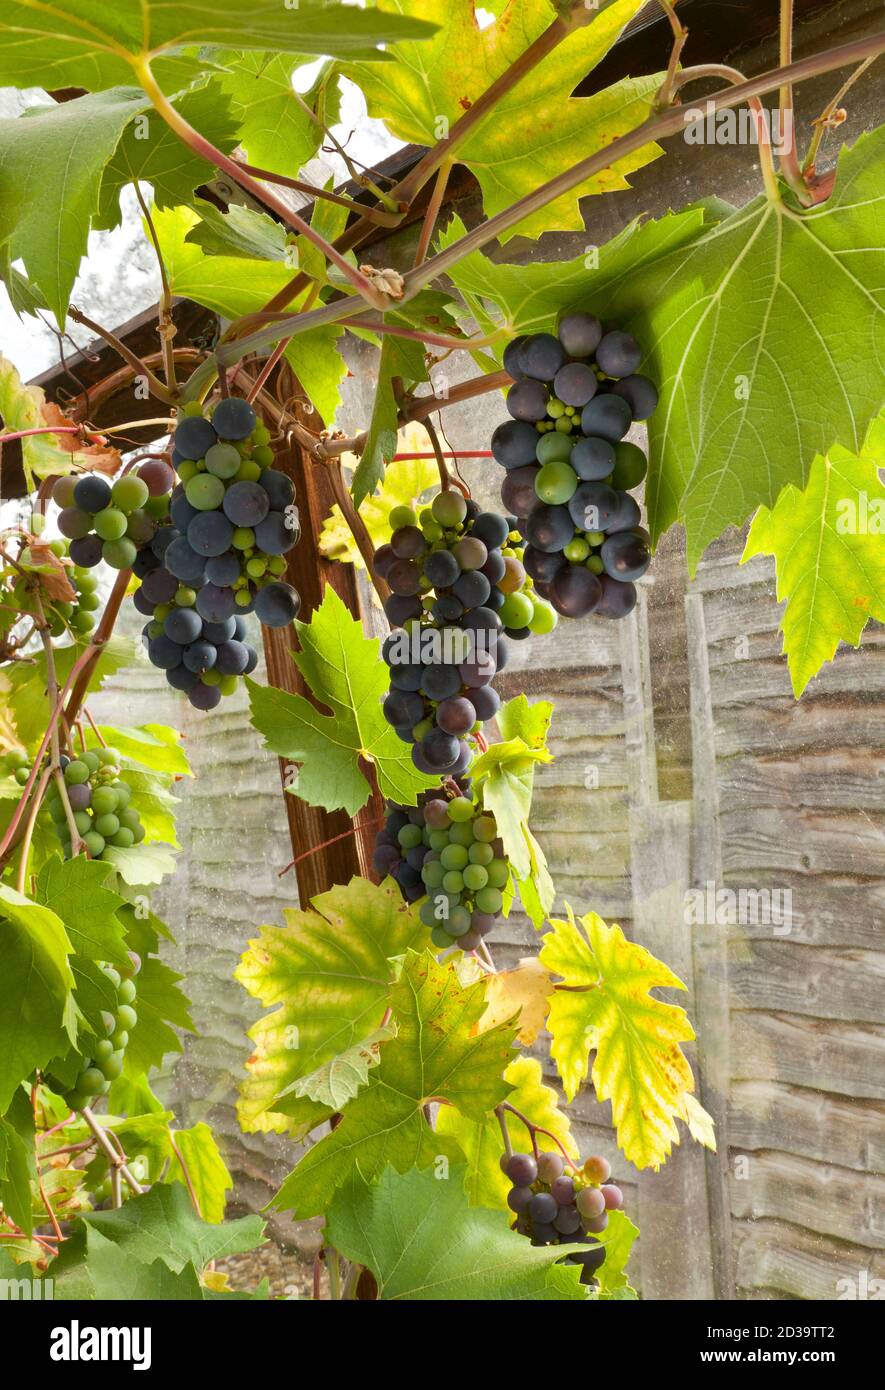 Grapes on the vine growing in a greenhouse Stock Photo